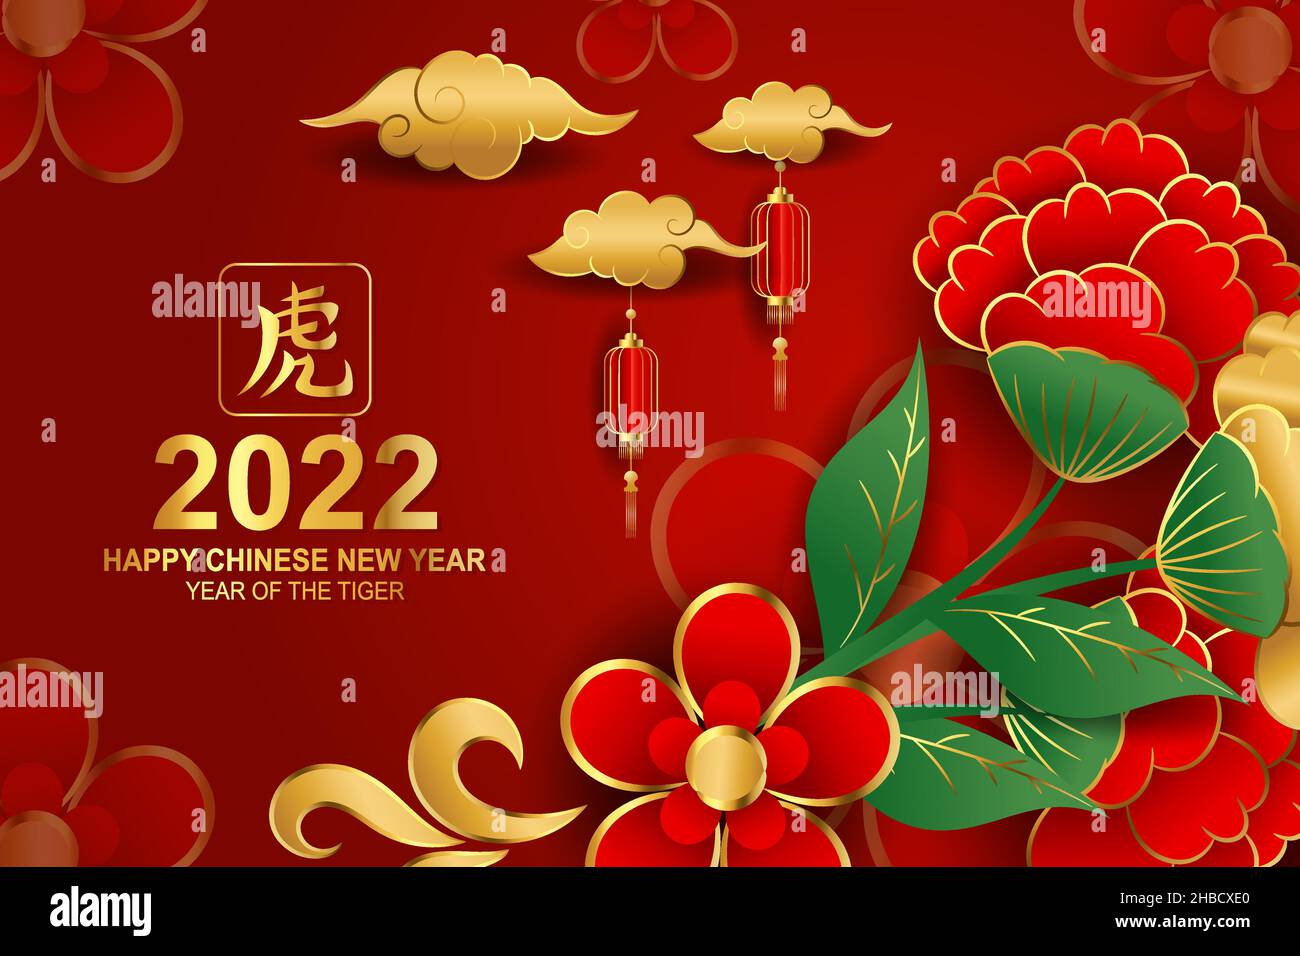 Happy Chinese new year 2022 year of the tiger with floral decoration background Stock Vector